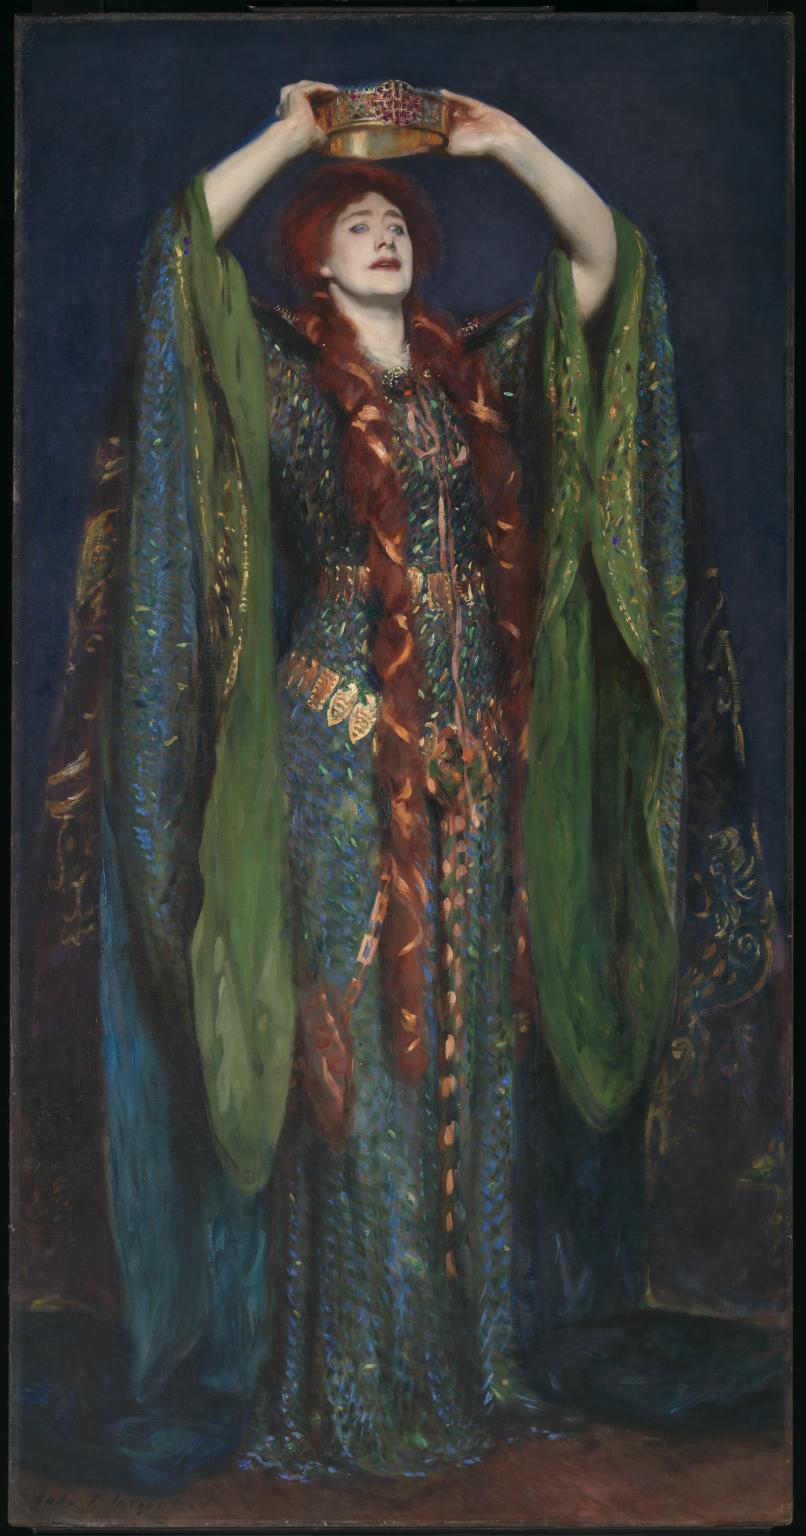 A tall woman with long braided hair stands wearing a long draping cloak while holding a crown just above her head.